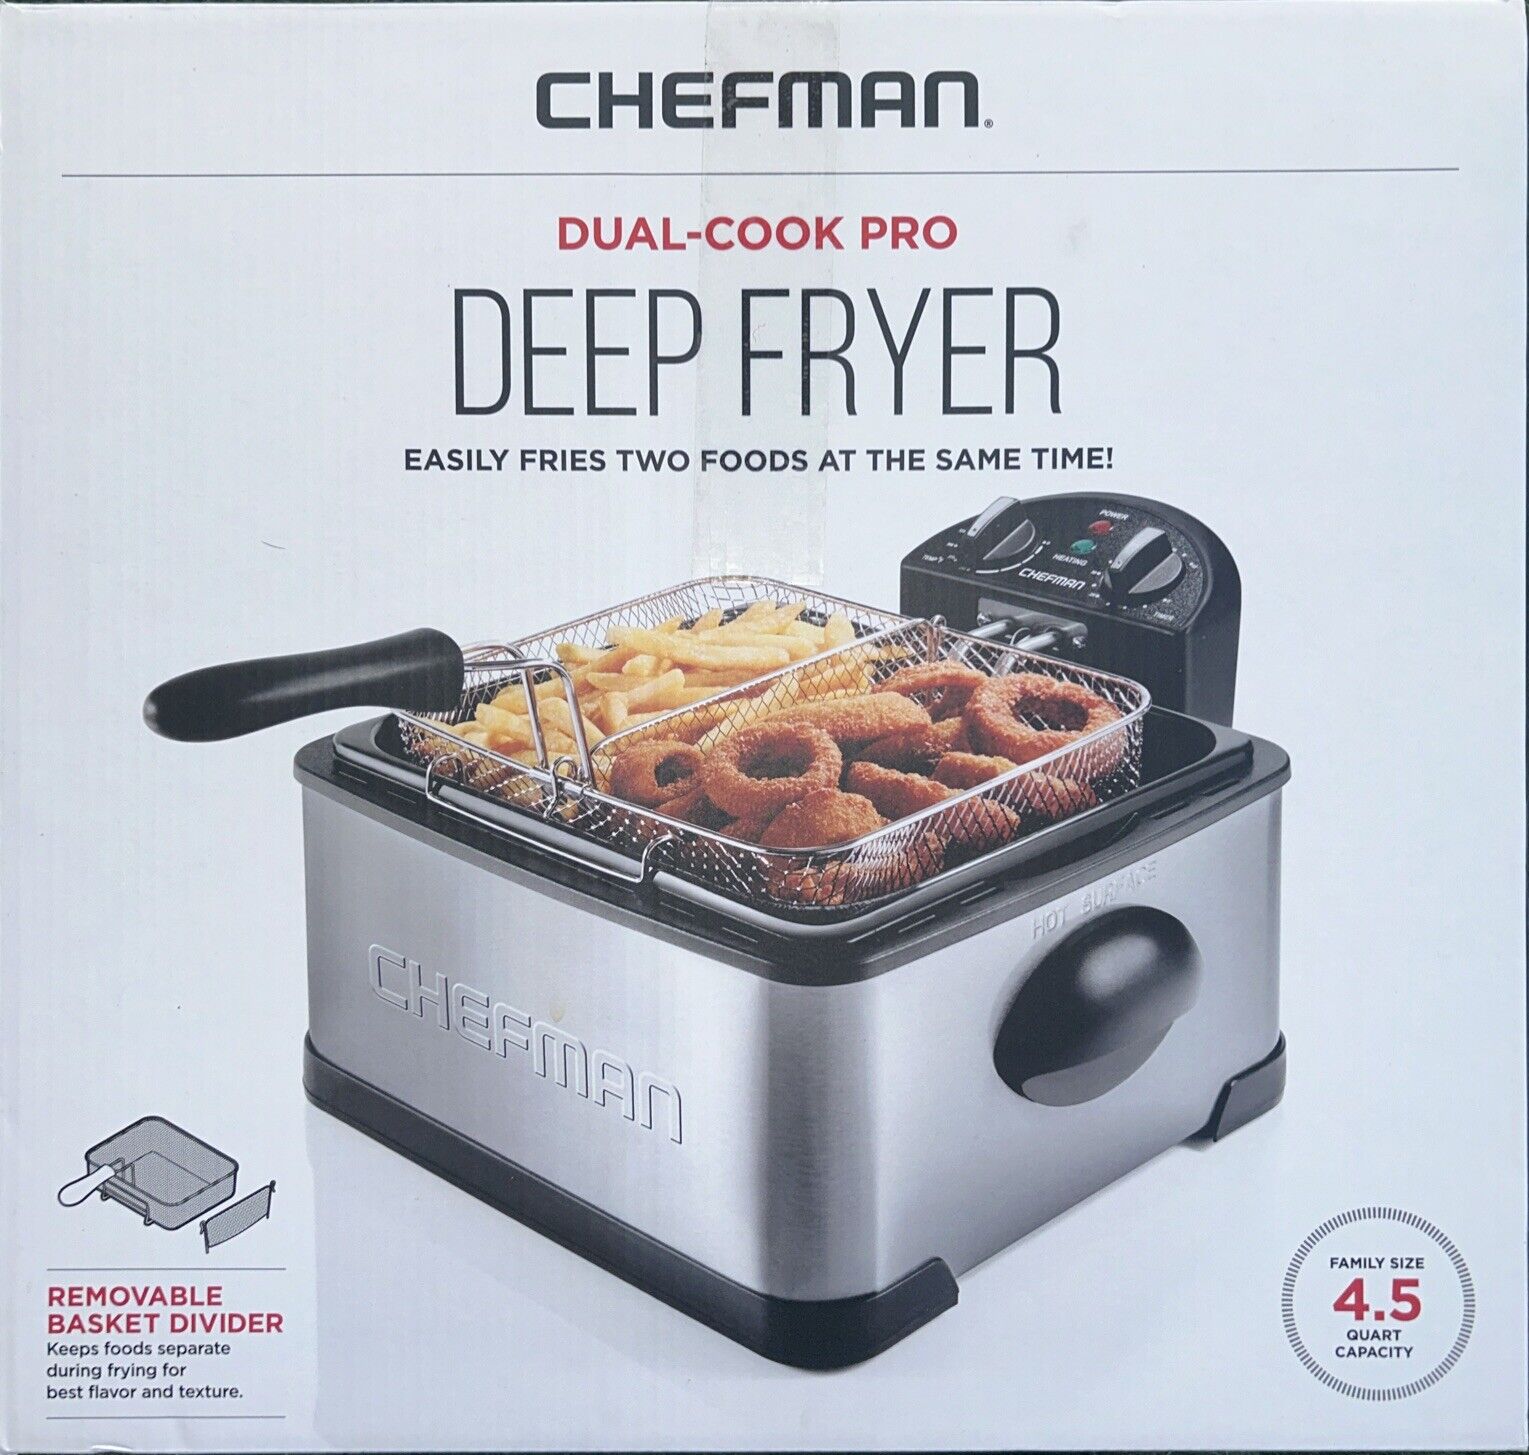 Chefman 4.5L Dual Cook Pro Deep Fryer with Basket Strainer and Removable Divid